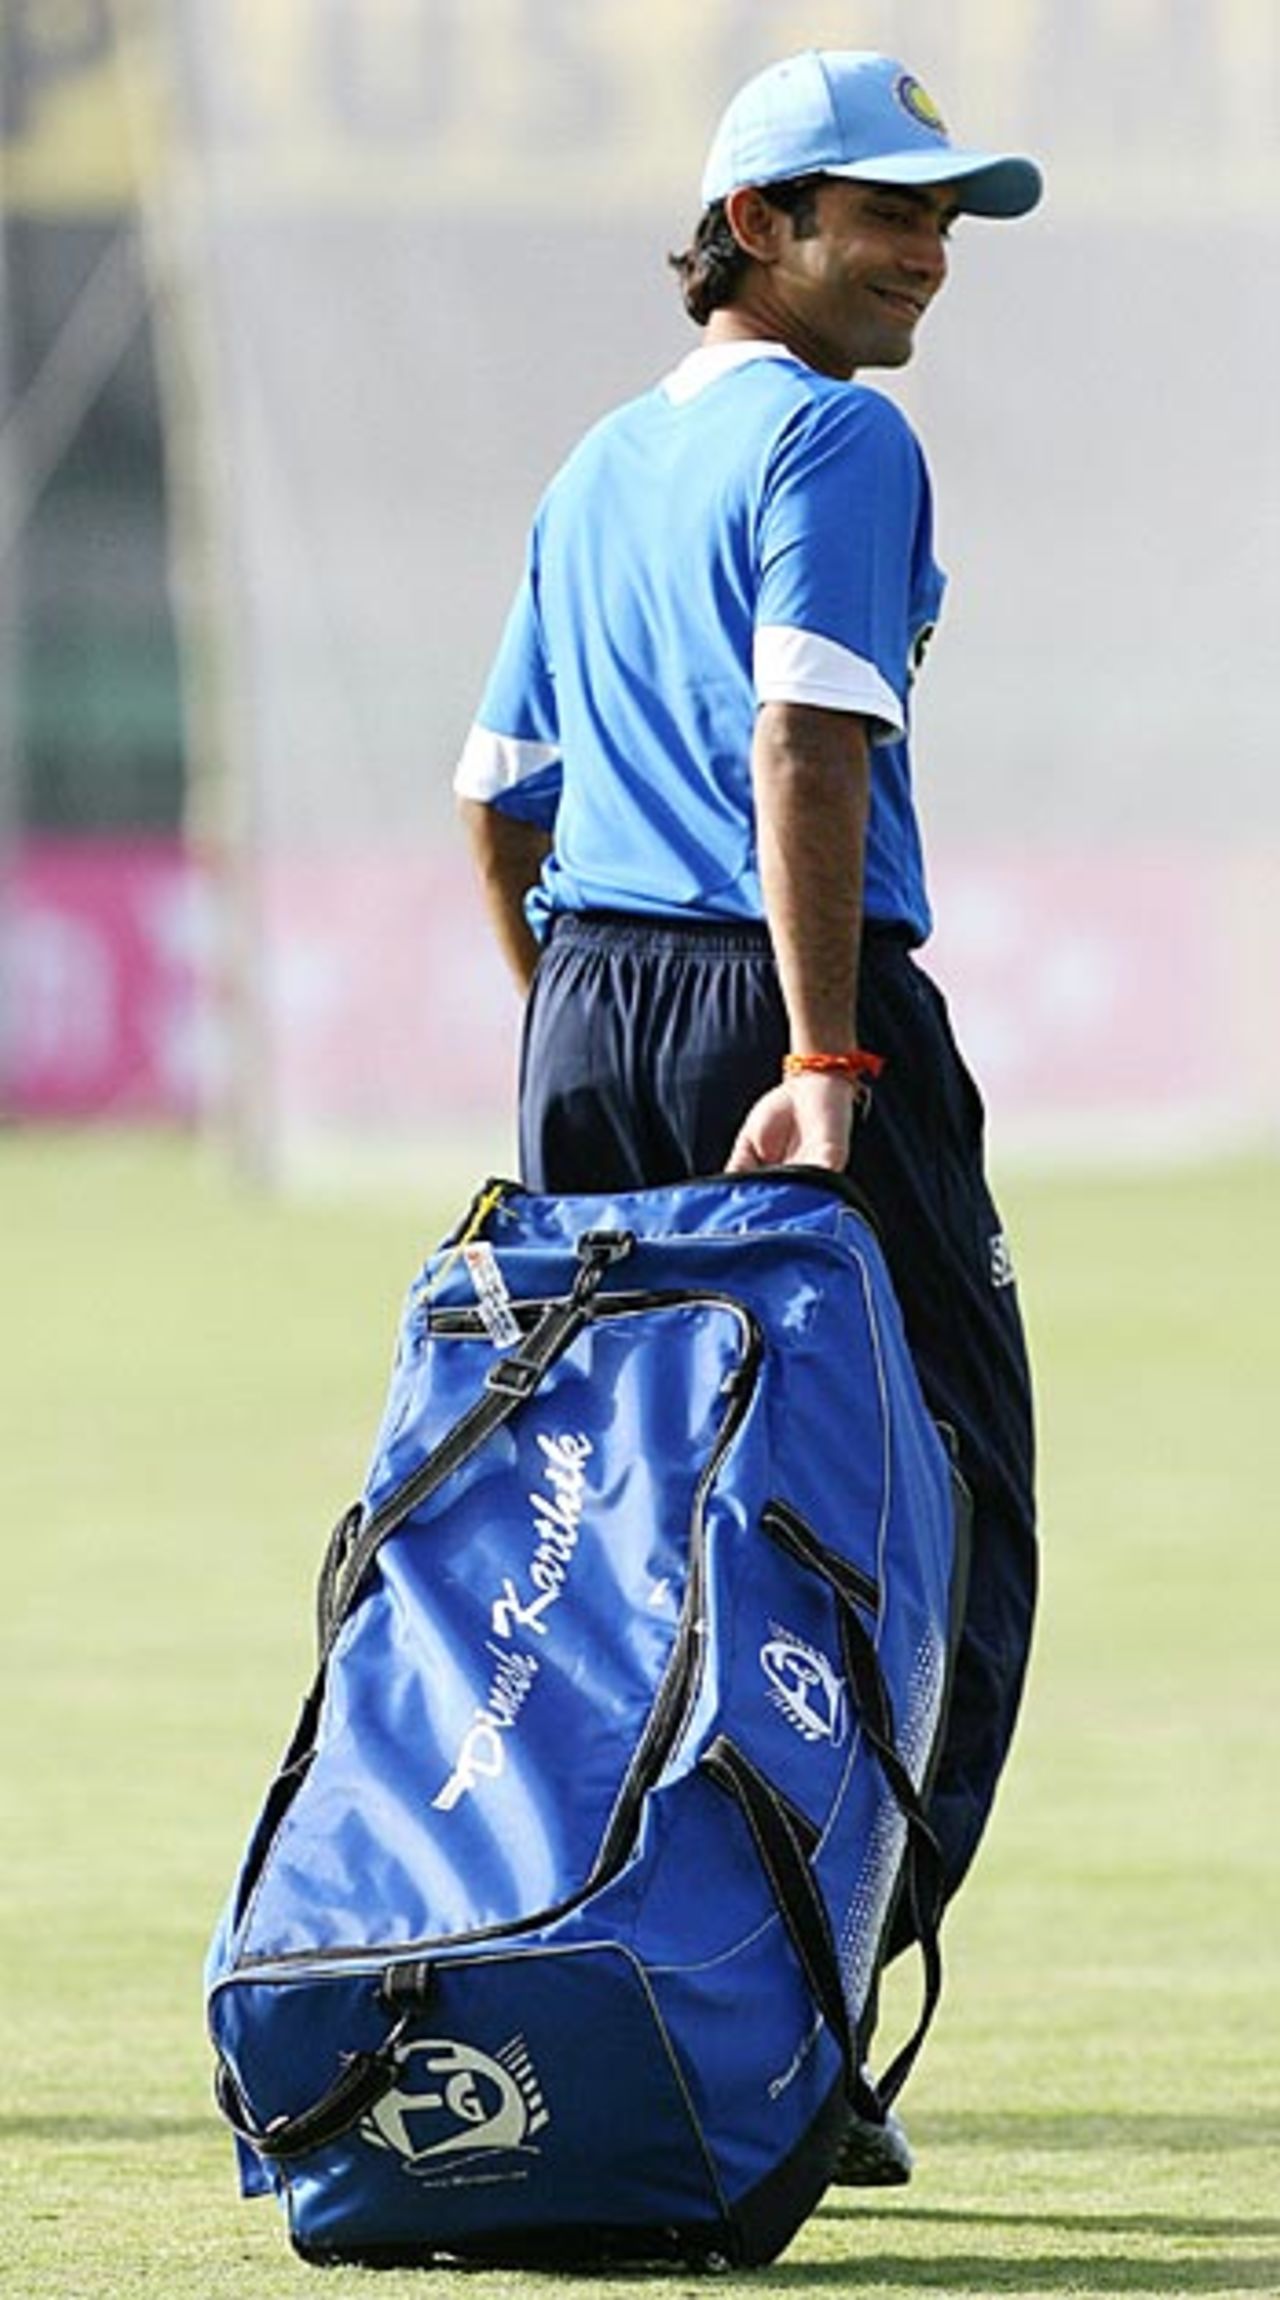 Dinesh Karthik arrives with his kit for net practice at Usha Raje Cricket ground in Indore, April 13, 2006